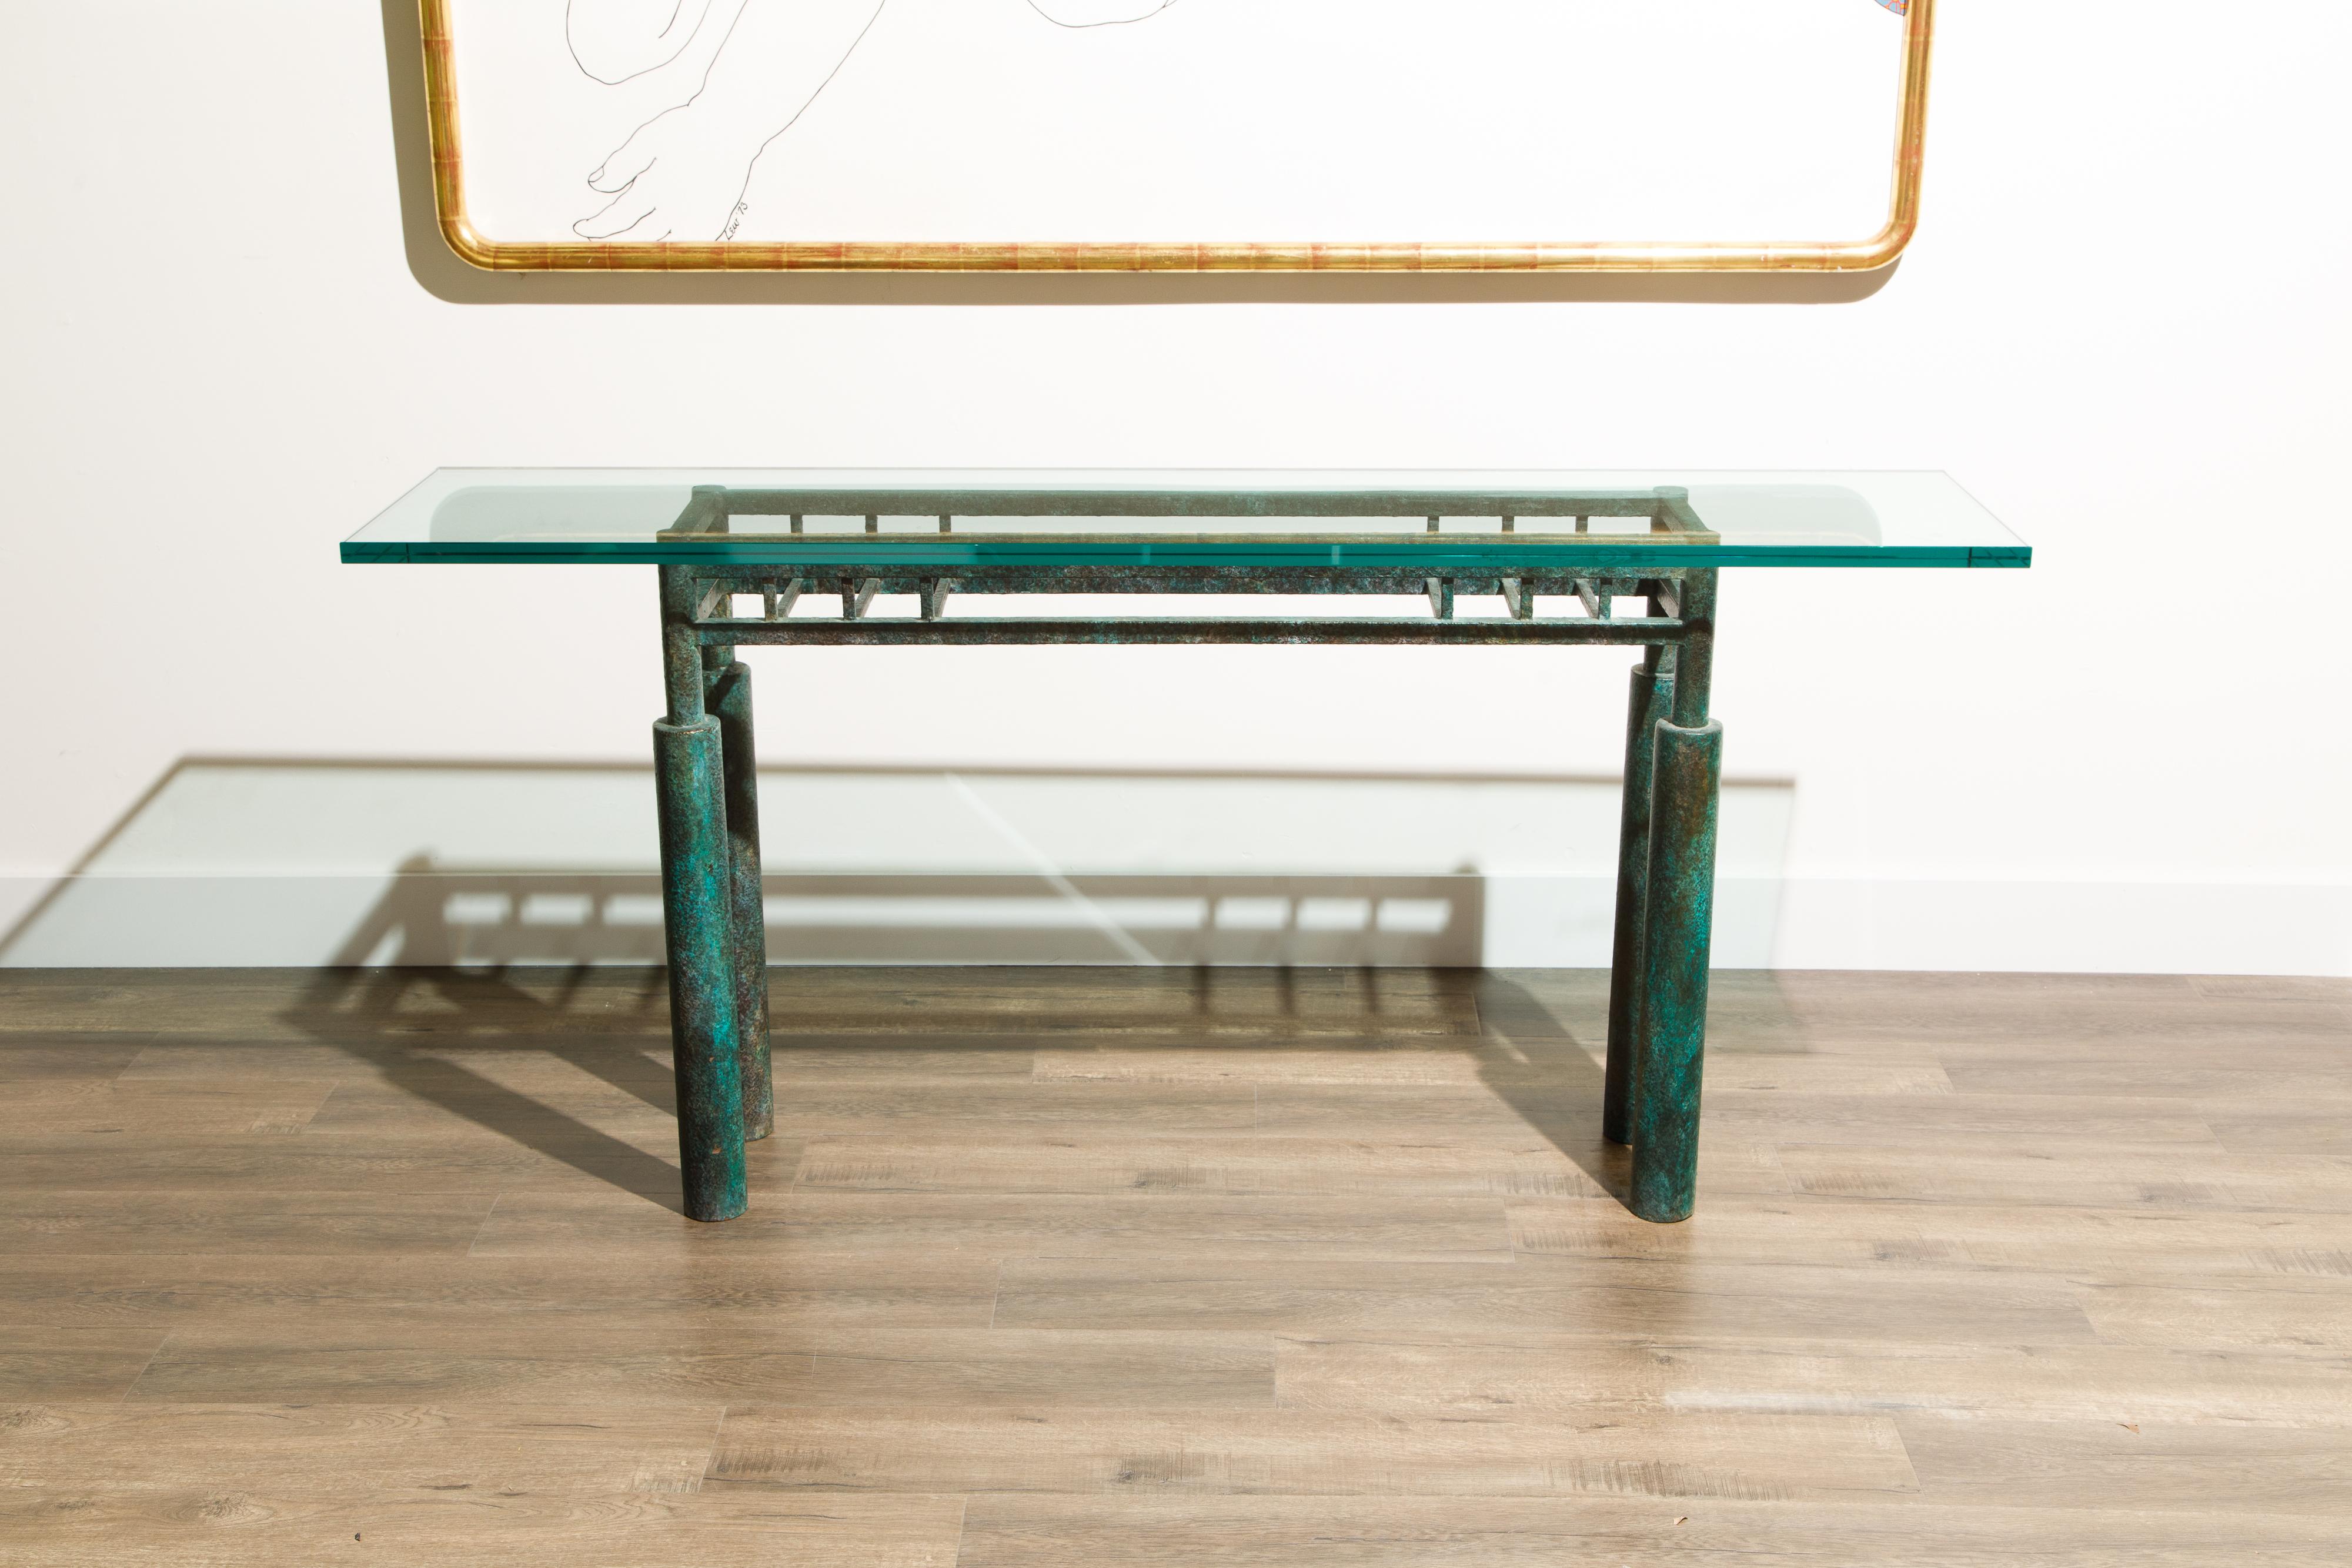 This Post-Modern brutalist console table by Steve Chase features a blueish green patinated steel frame with thick glass top. For fans of the movie 'Beetlejuice' - this piece looks like it belongs right on the set of the main house after it was